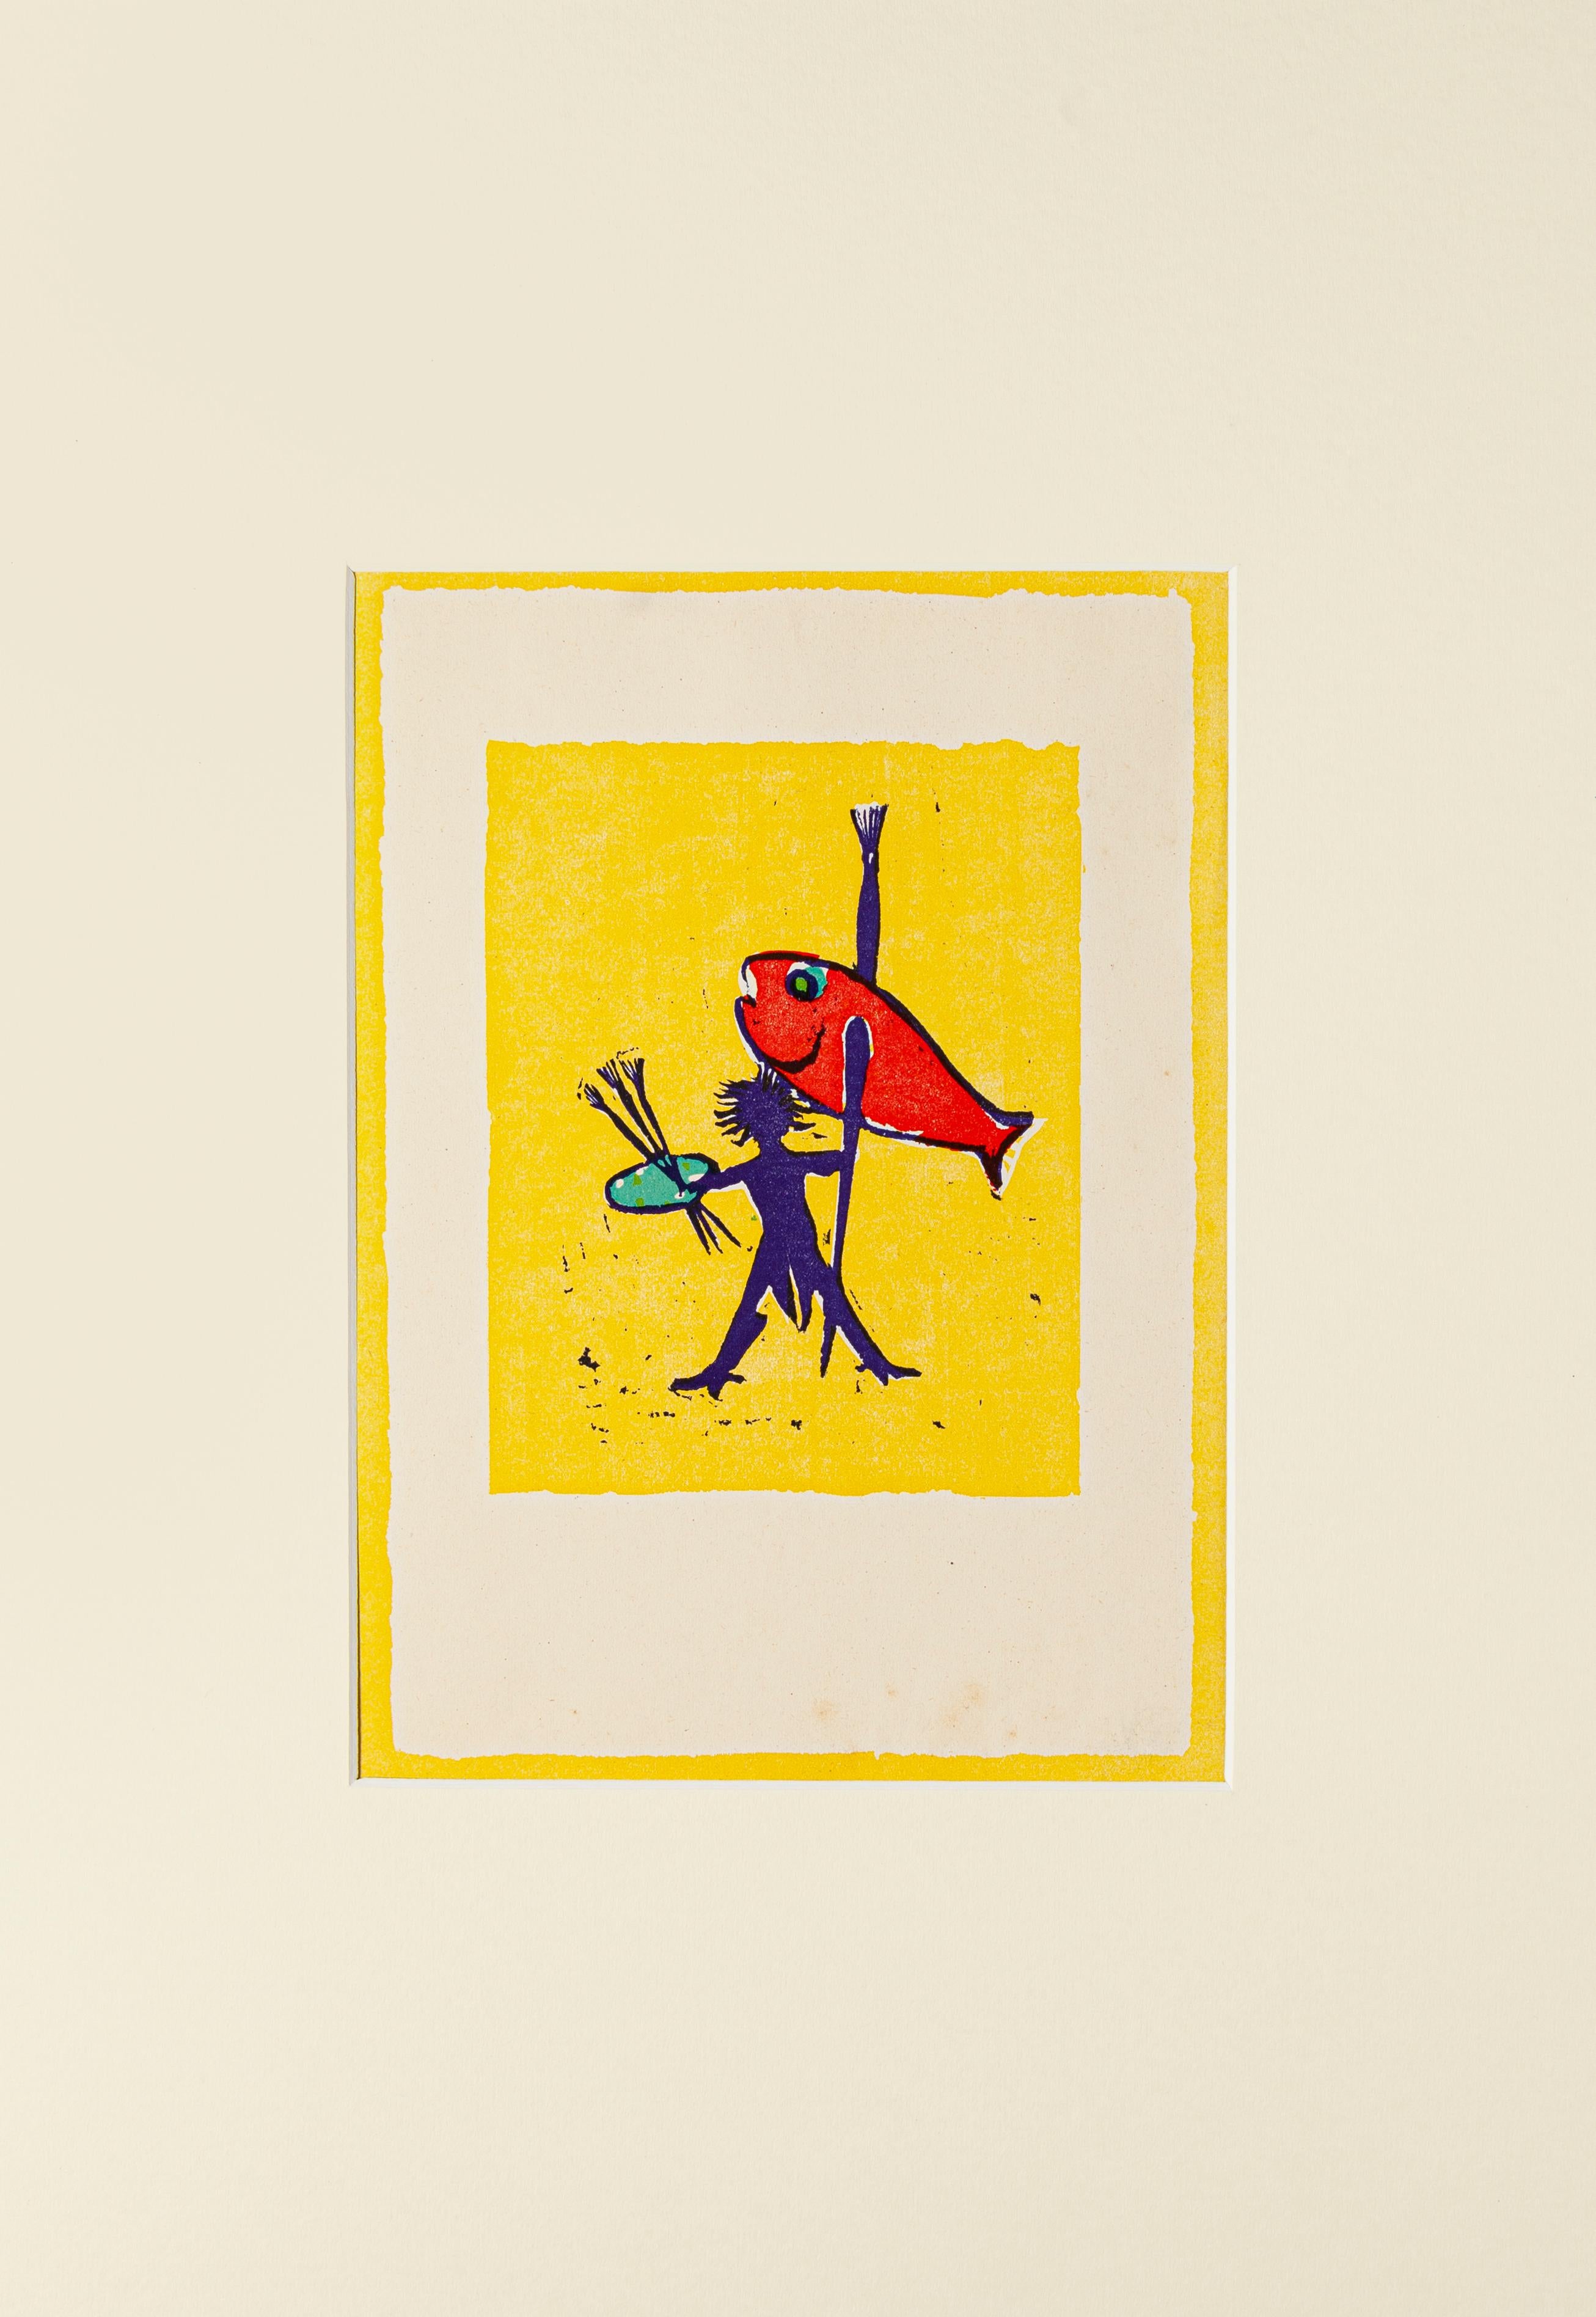 Painter Fisherman is a woodcut artwork realized by Mino Maccari.

Included a white Passepartout: 49 x 34 cm.

The state of preservation is very good.

The artwork represents a boy hunting a big red fish with yellowish background. The artwork is